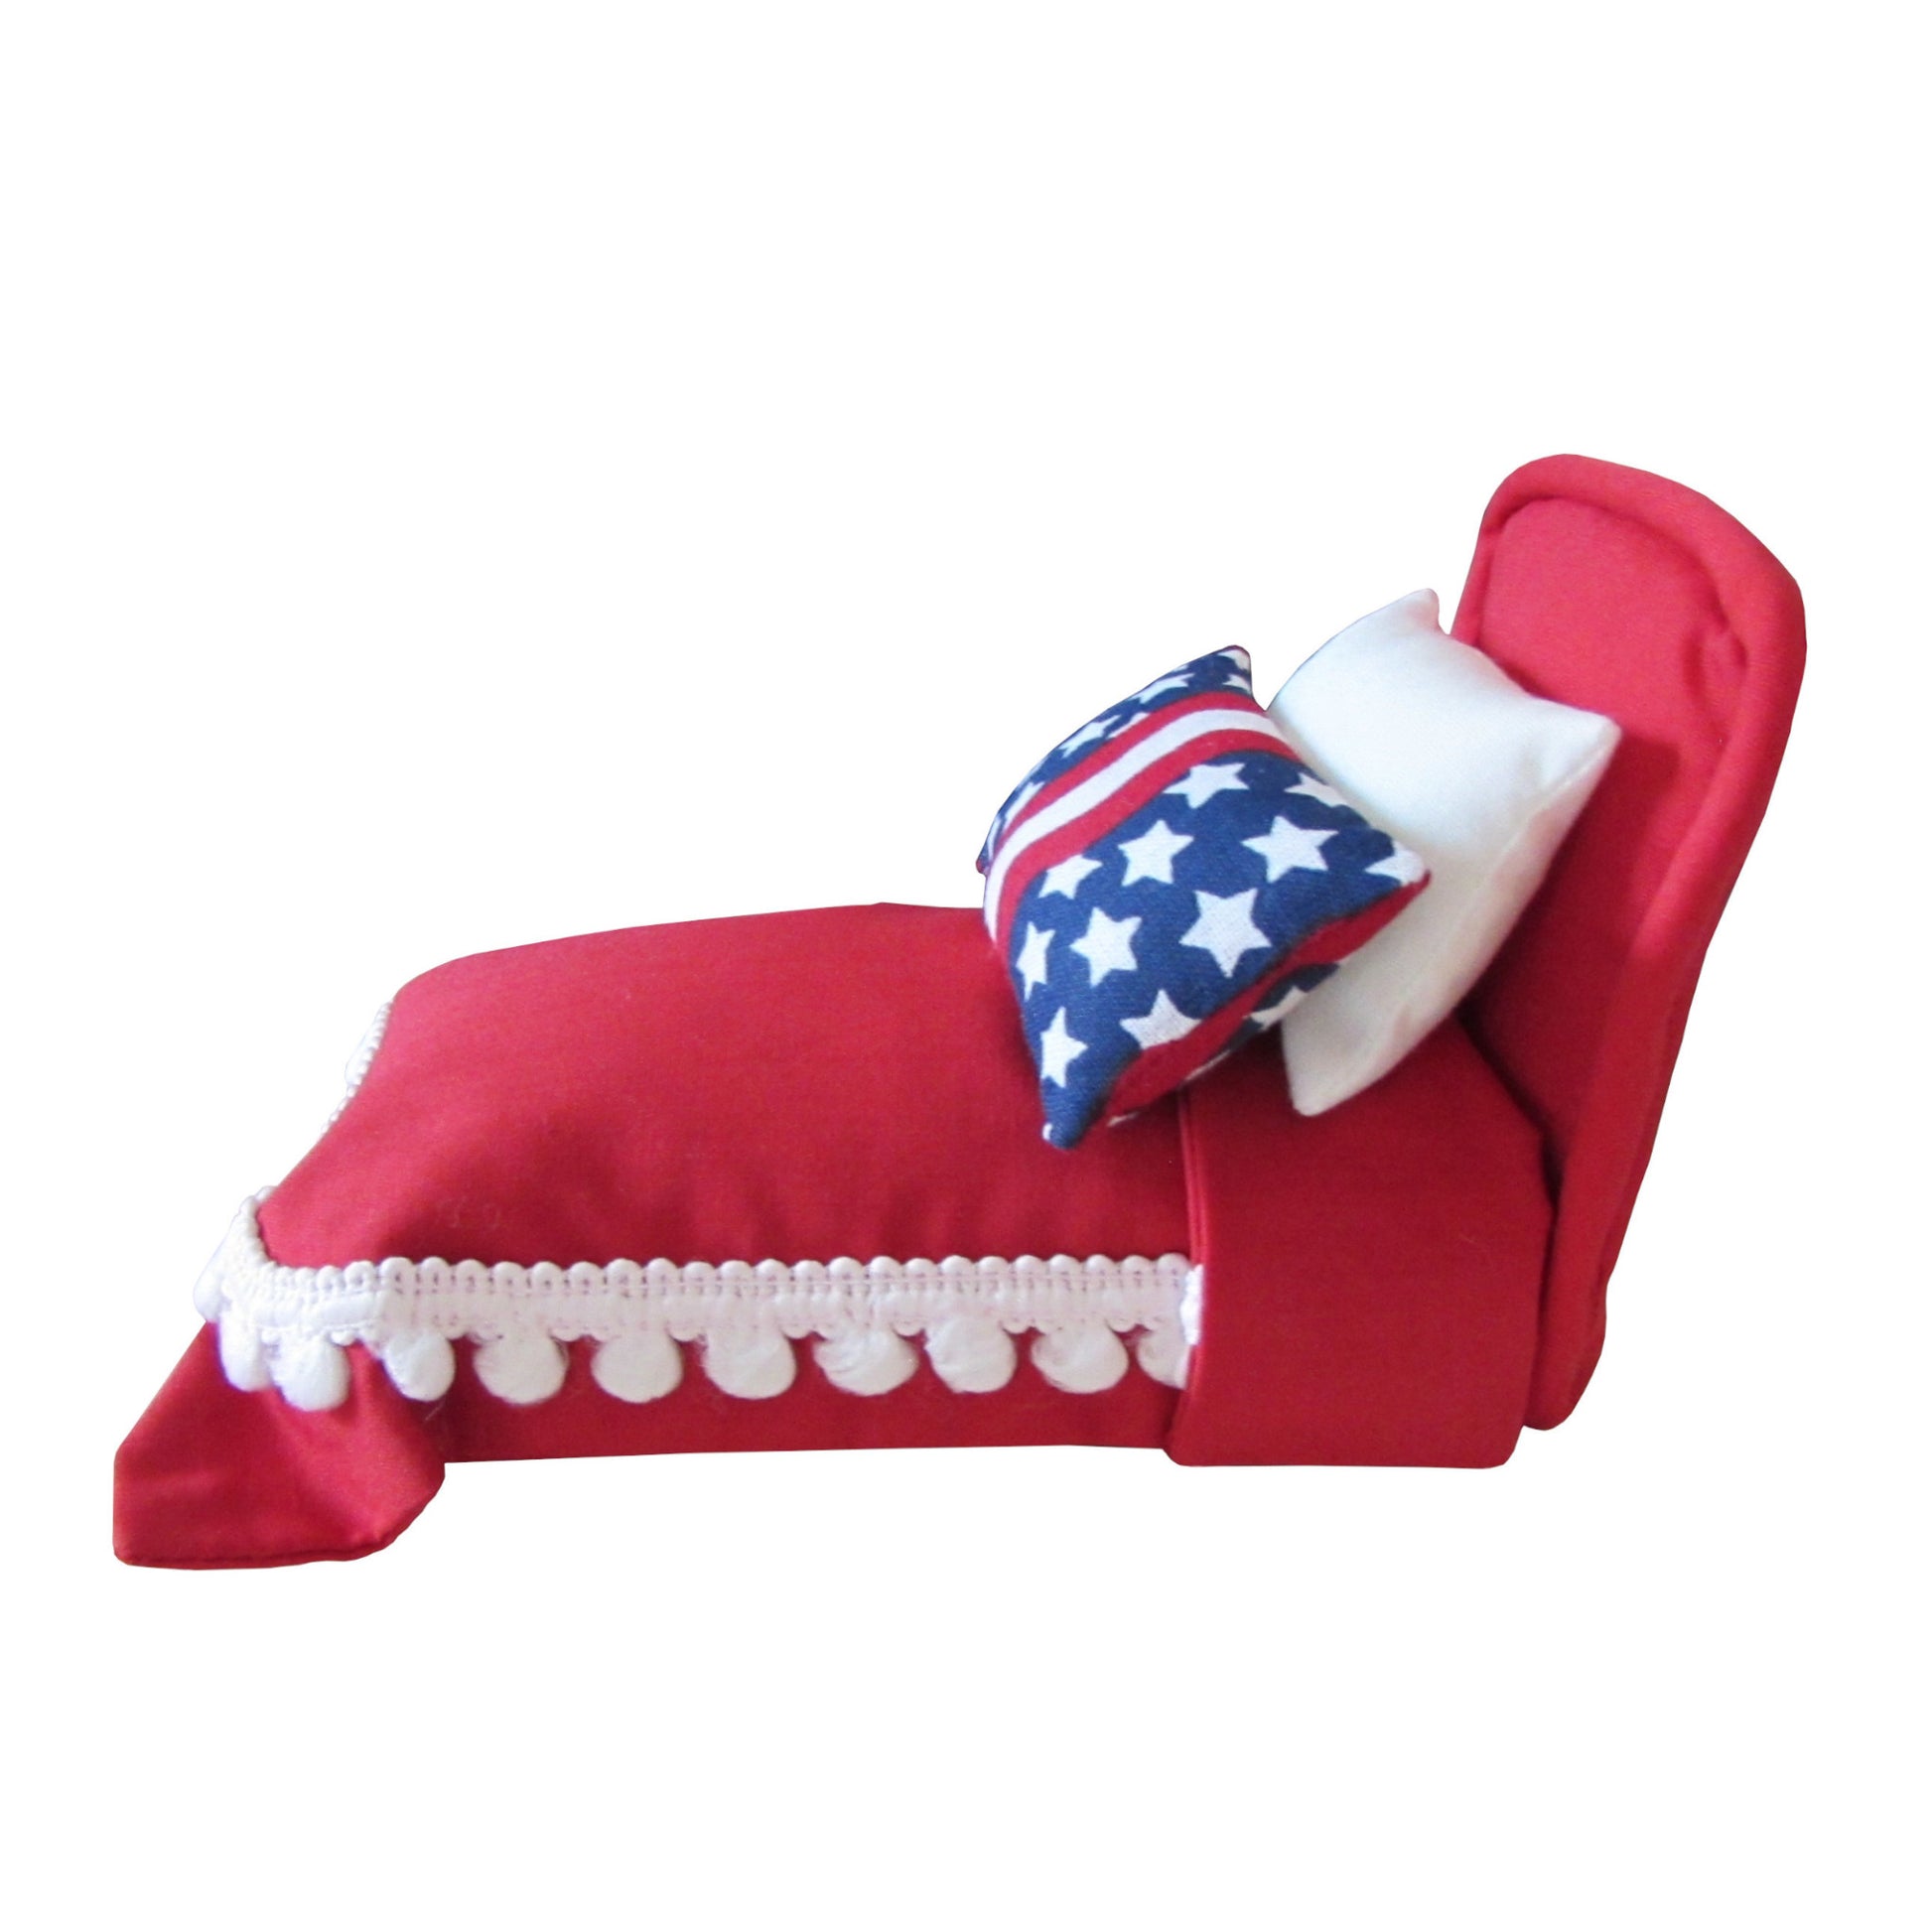 Red Pincushion Bed with Stars and Stripes Pillow Side view 2